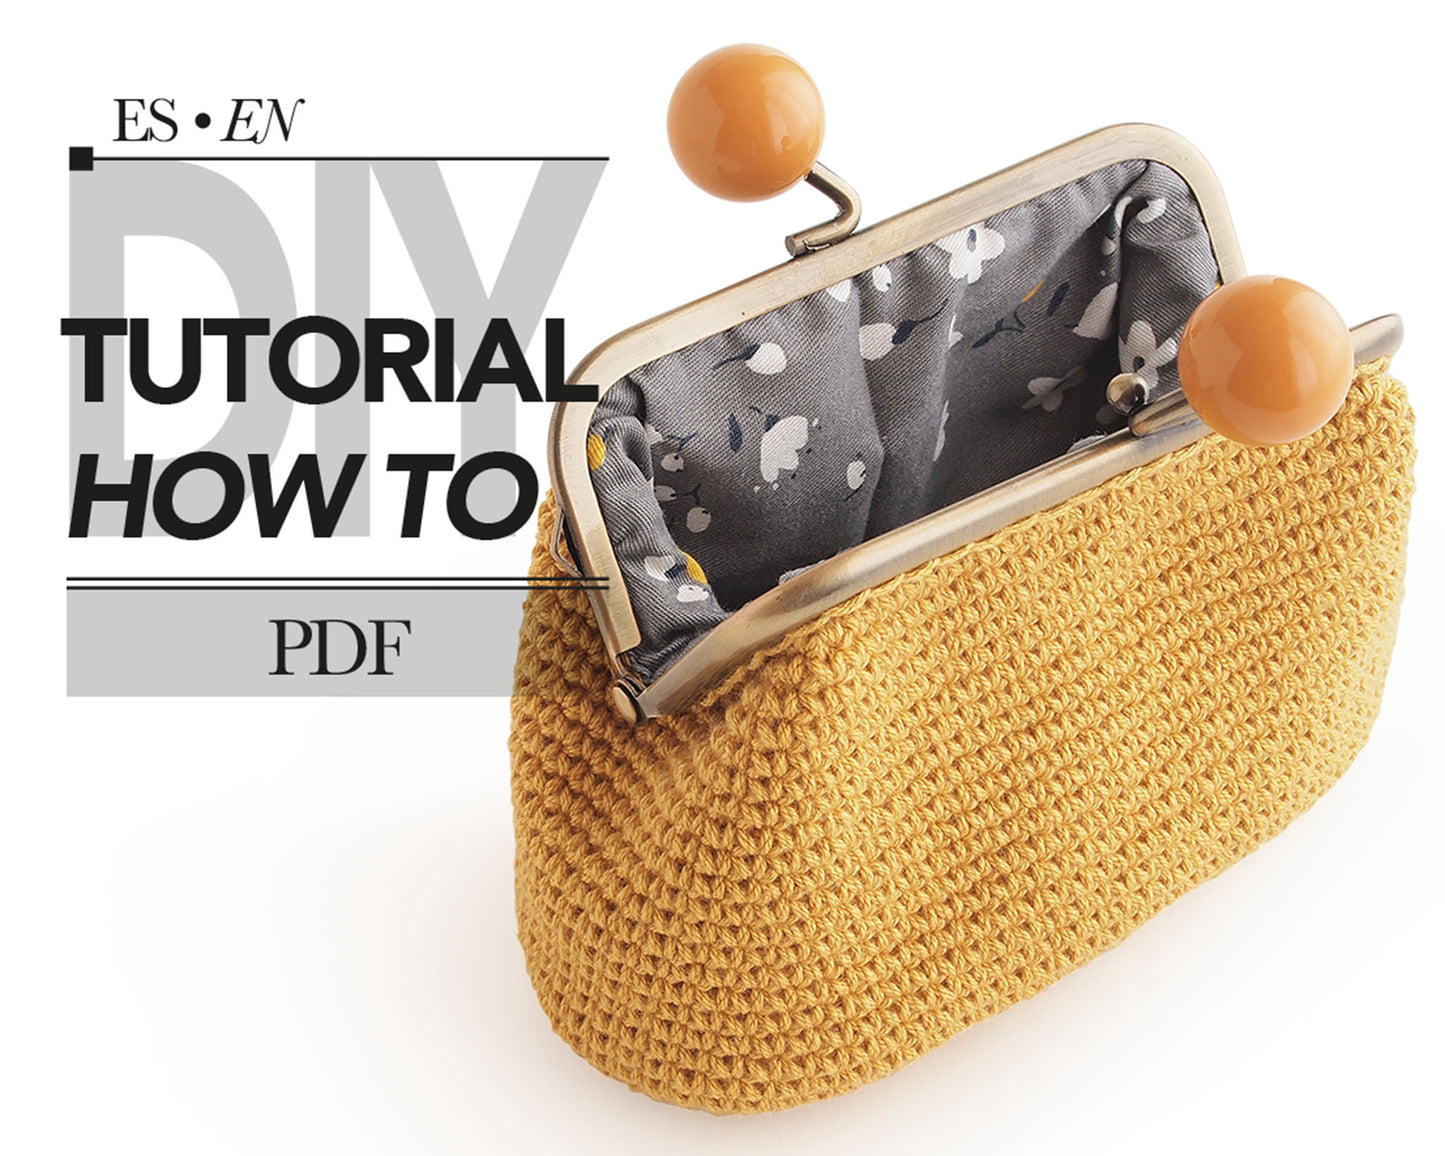 TUTORIAL: Lining and assembling a OVAL BASE clasp coin purse